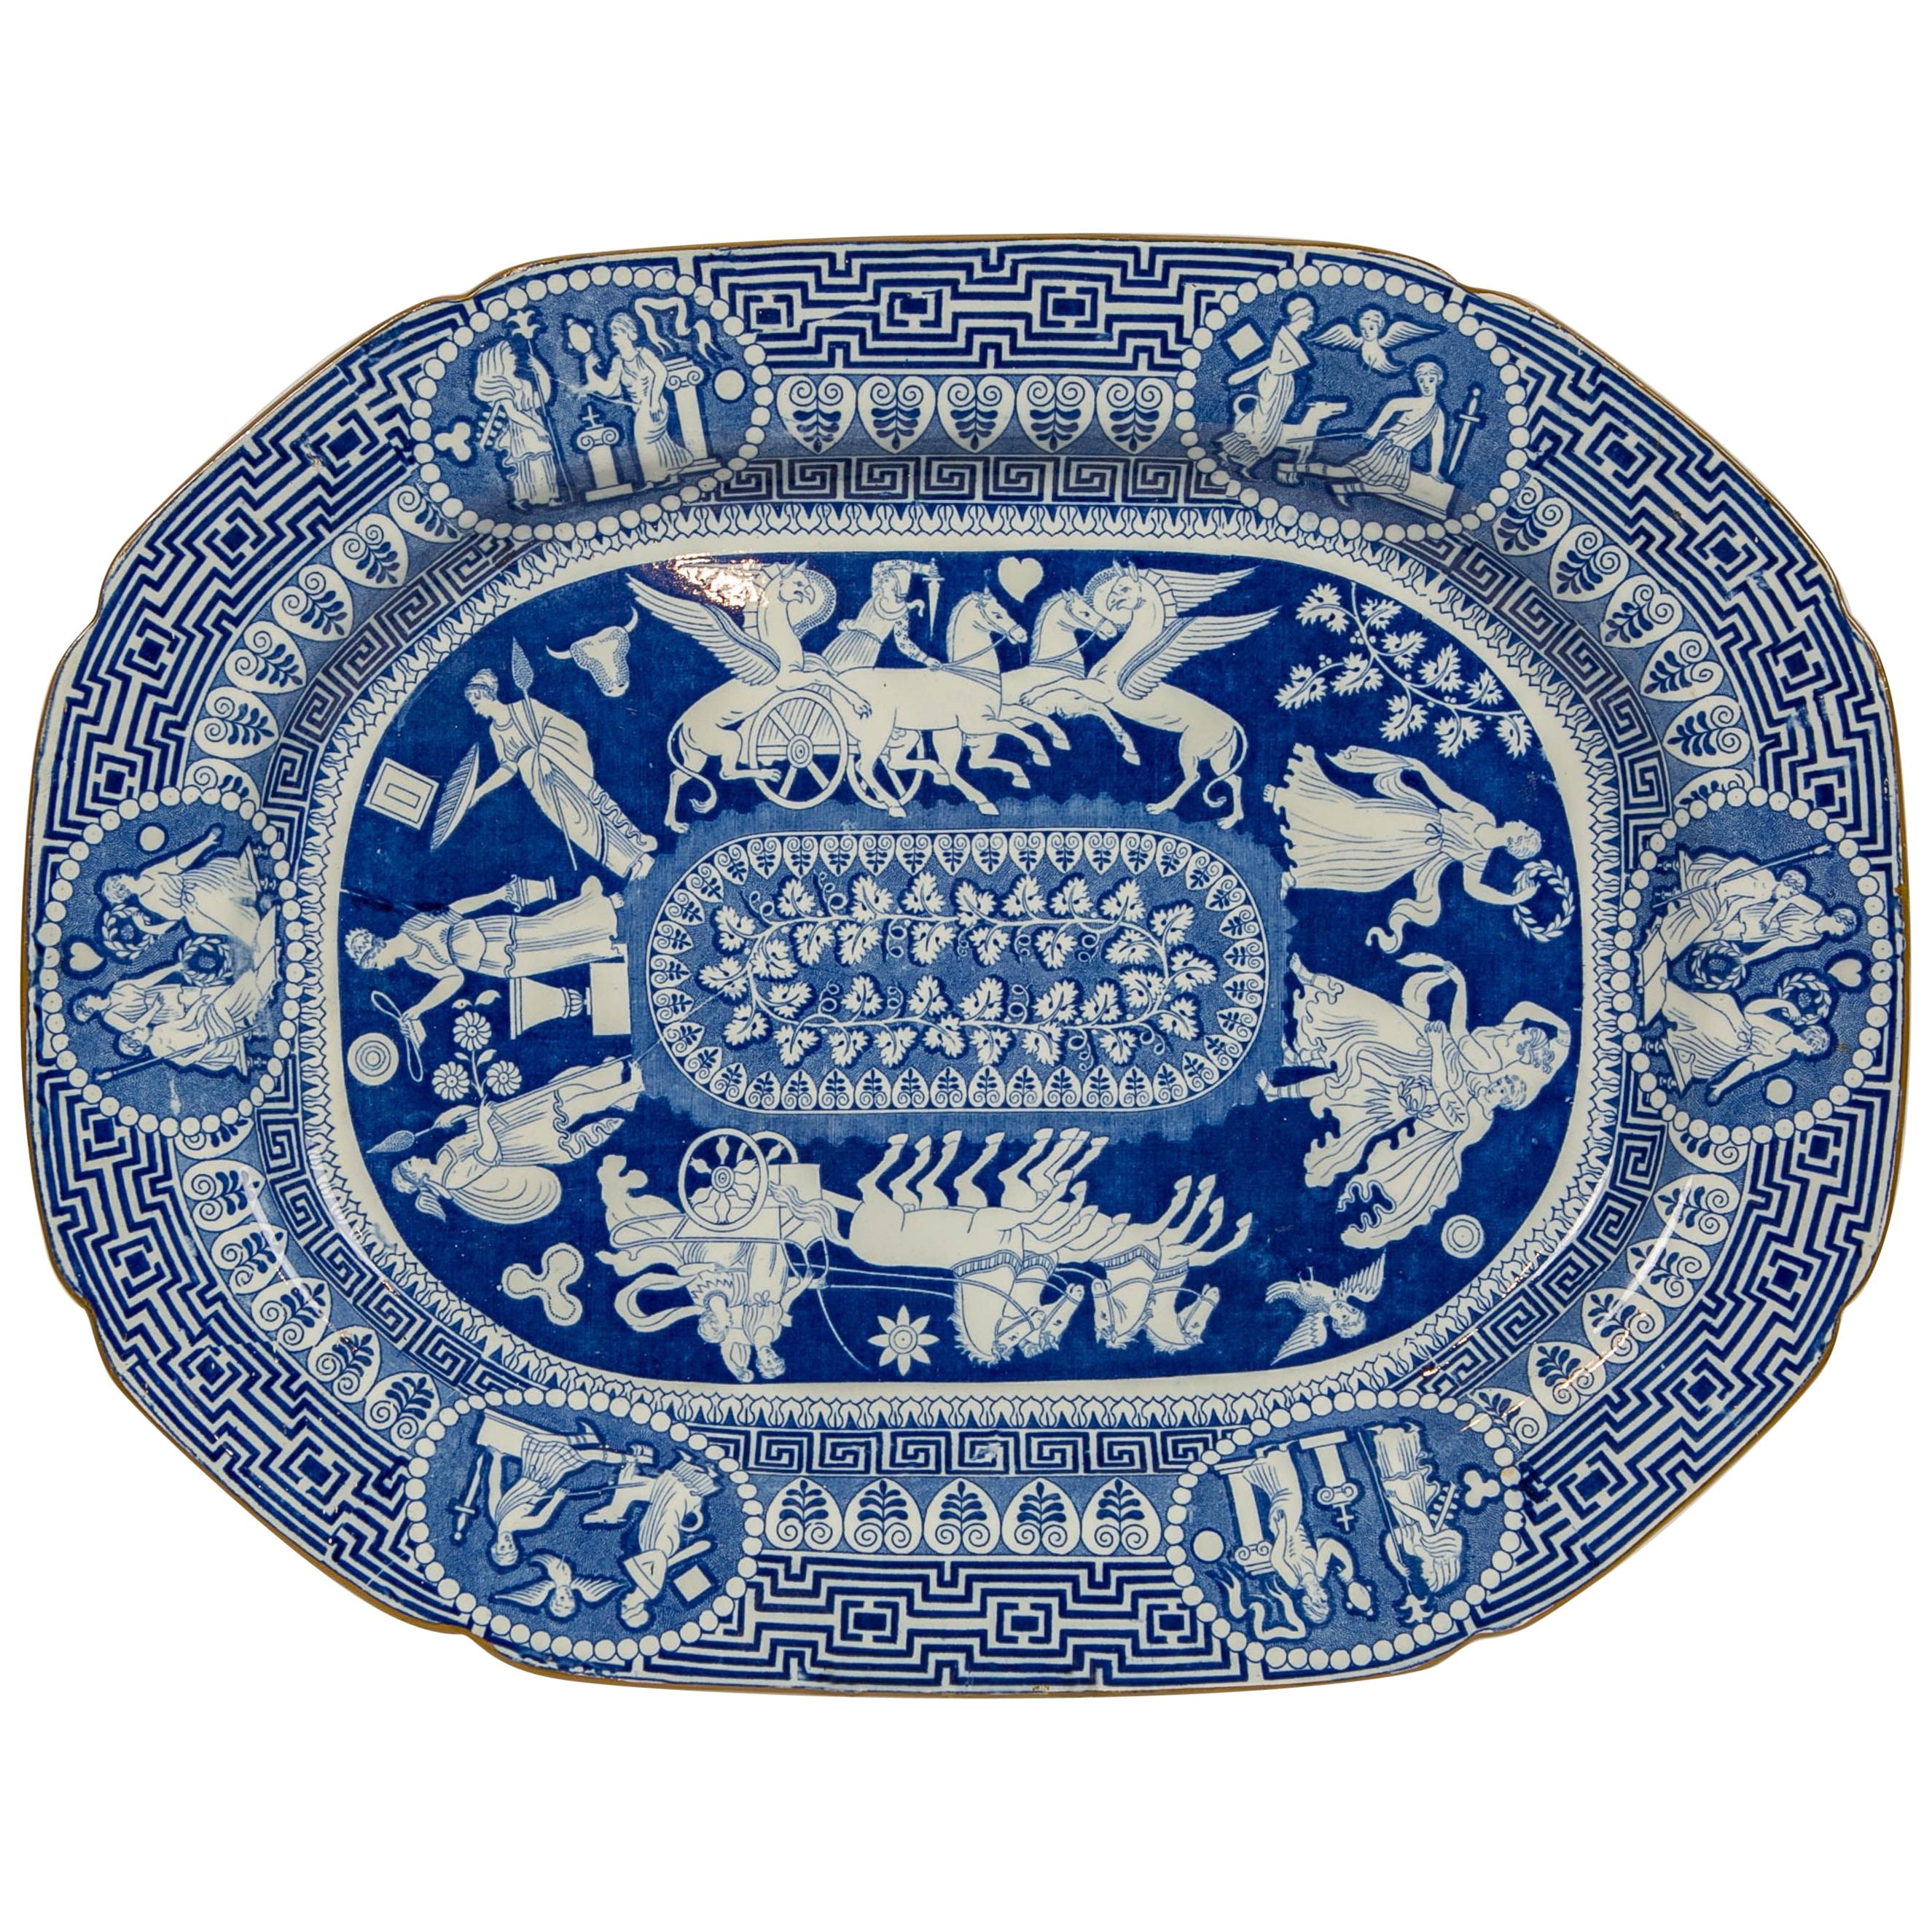 Large Blue and White Neoclassical Platter Made by Heculaneum in England, c-1810